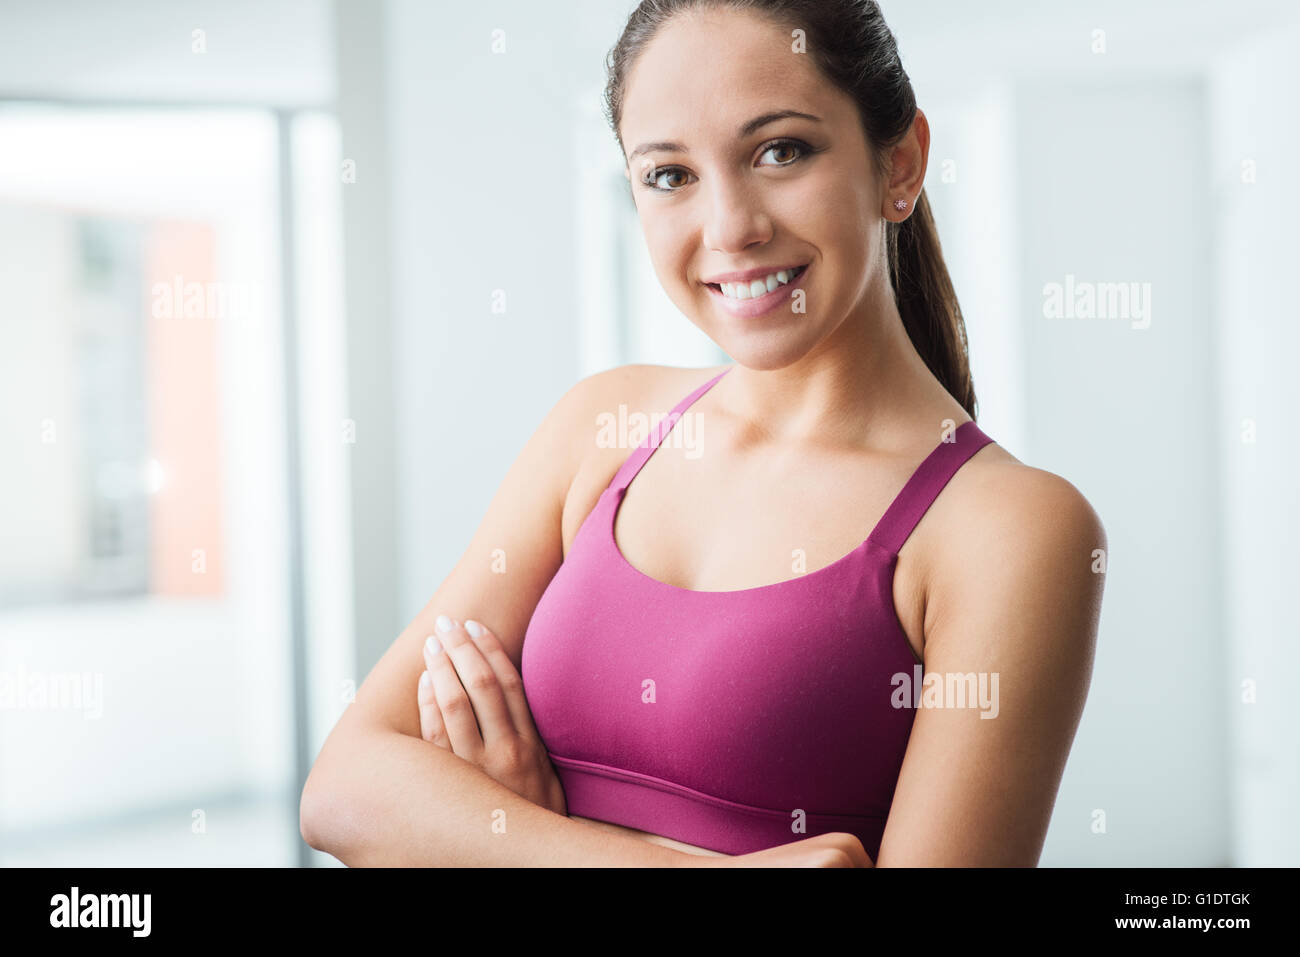 Young smiling woman posing at the gym and looking at camera, fitness and healthy lifestyle concept Stock Photo